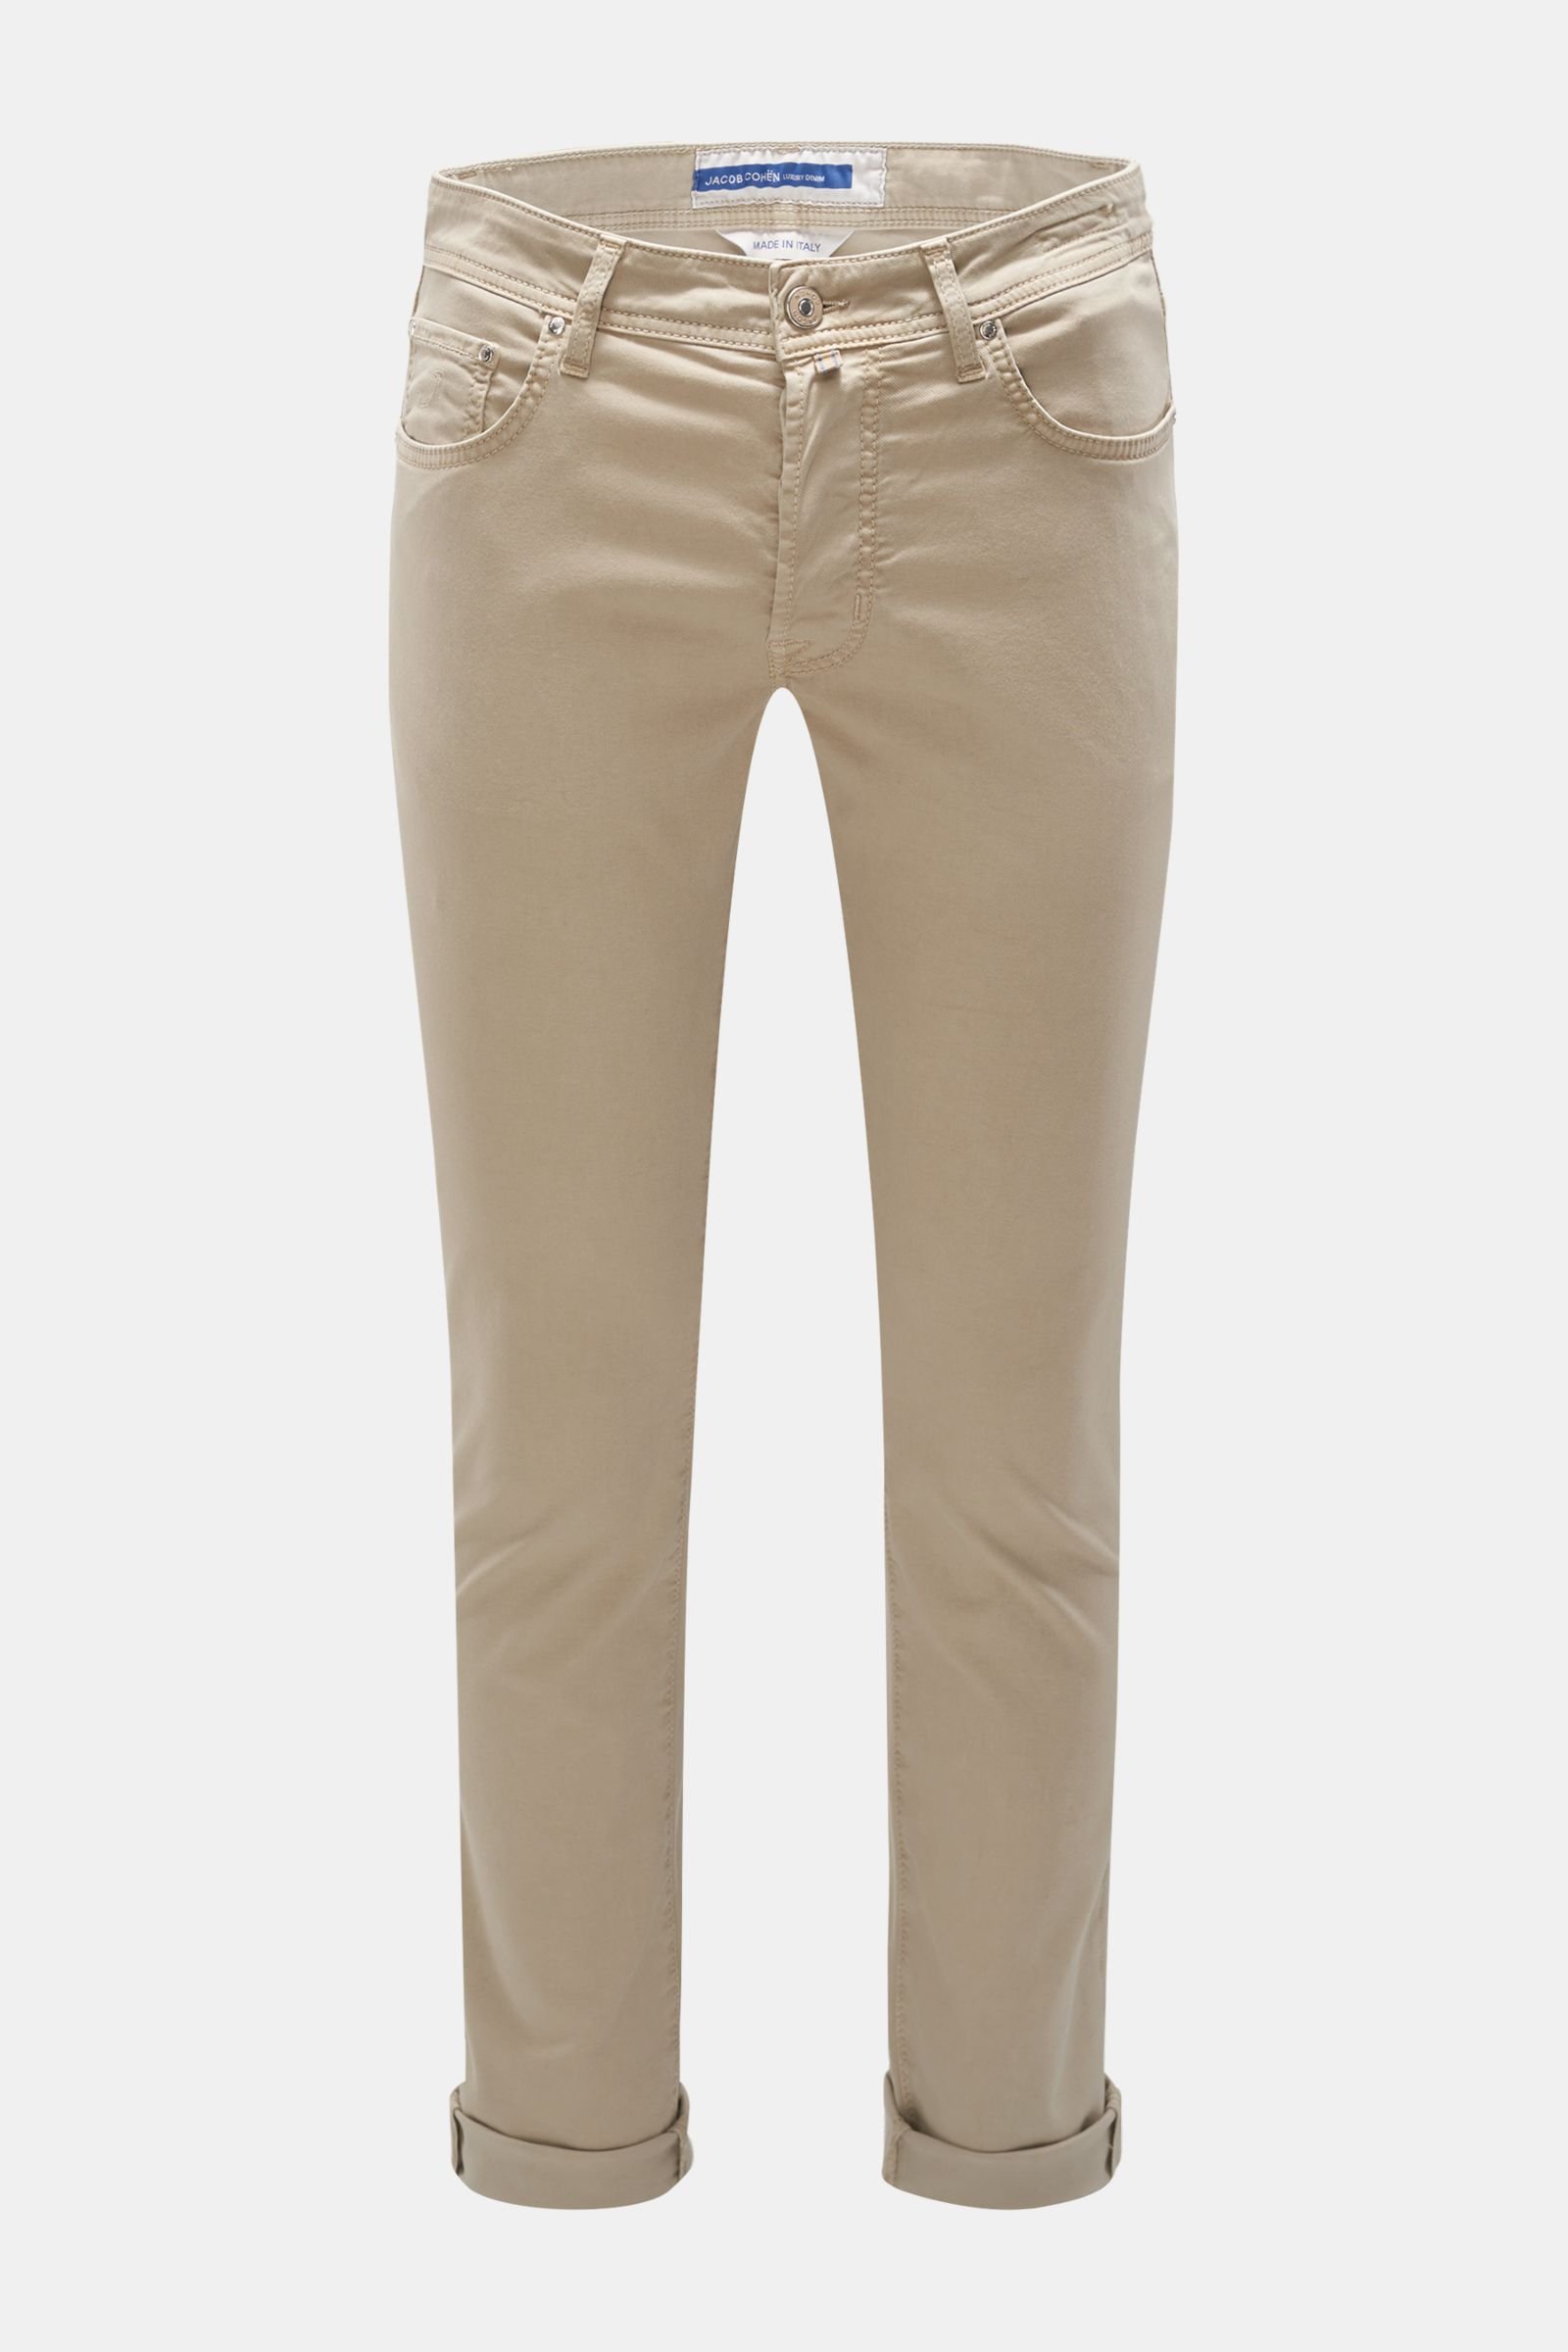 'Bard' trousers beige (previously J688)